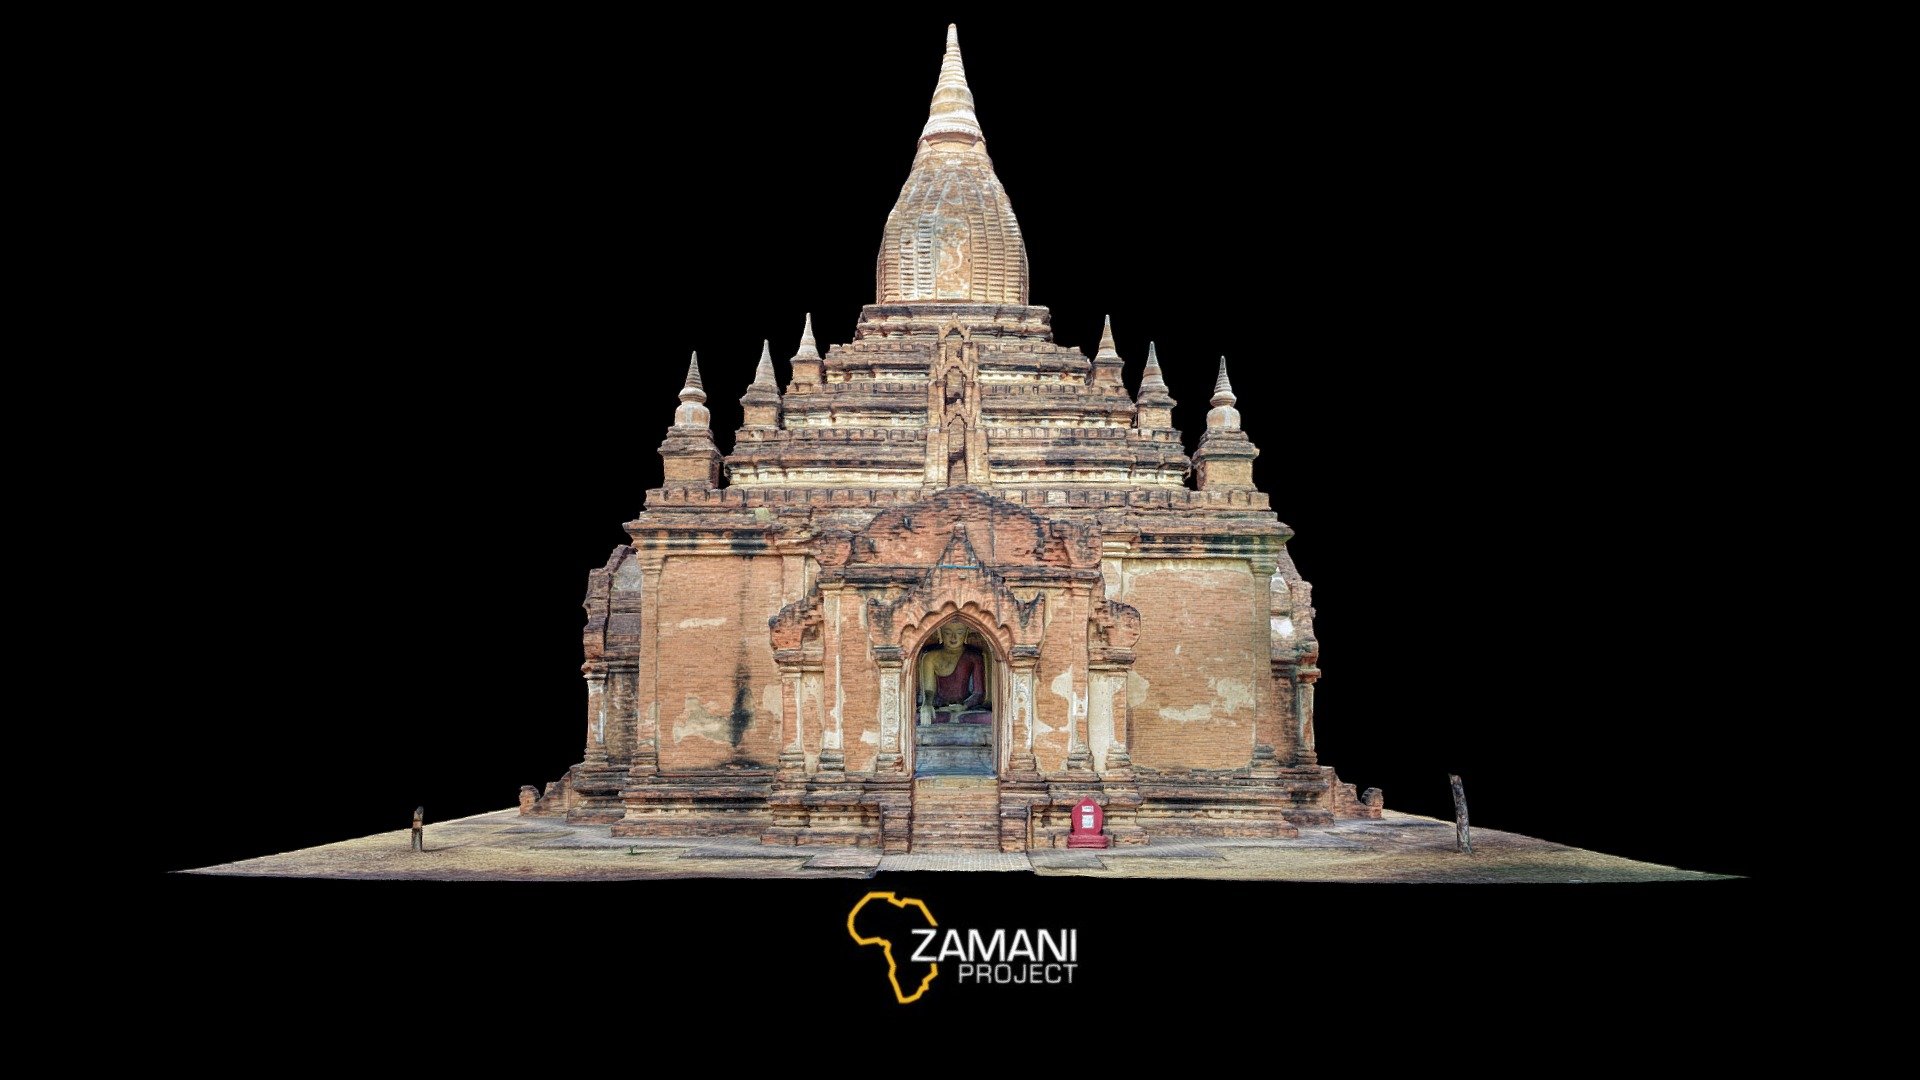 During 3 field campaigns between 2017-2018, the Zamani Project spatially documented 12 monuments in Bagan.

Data captured with Z+F 5016 scanner and Phantom 4 pro drone In April 2018. All data procesed by the Zamani Project at the University of Cape Town 3d model